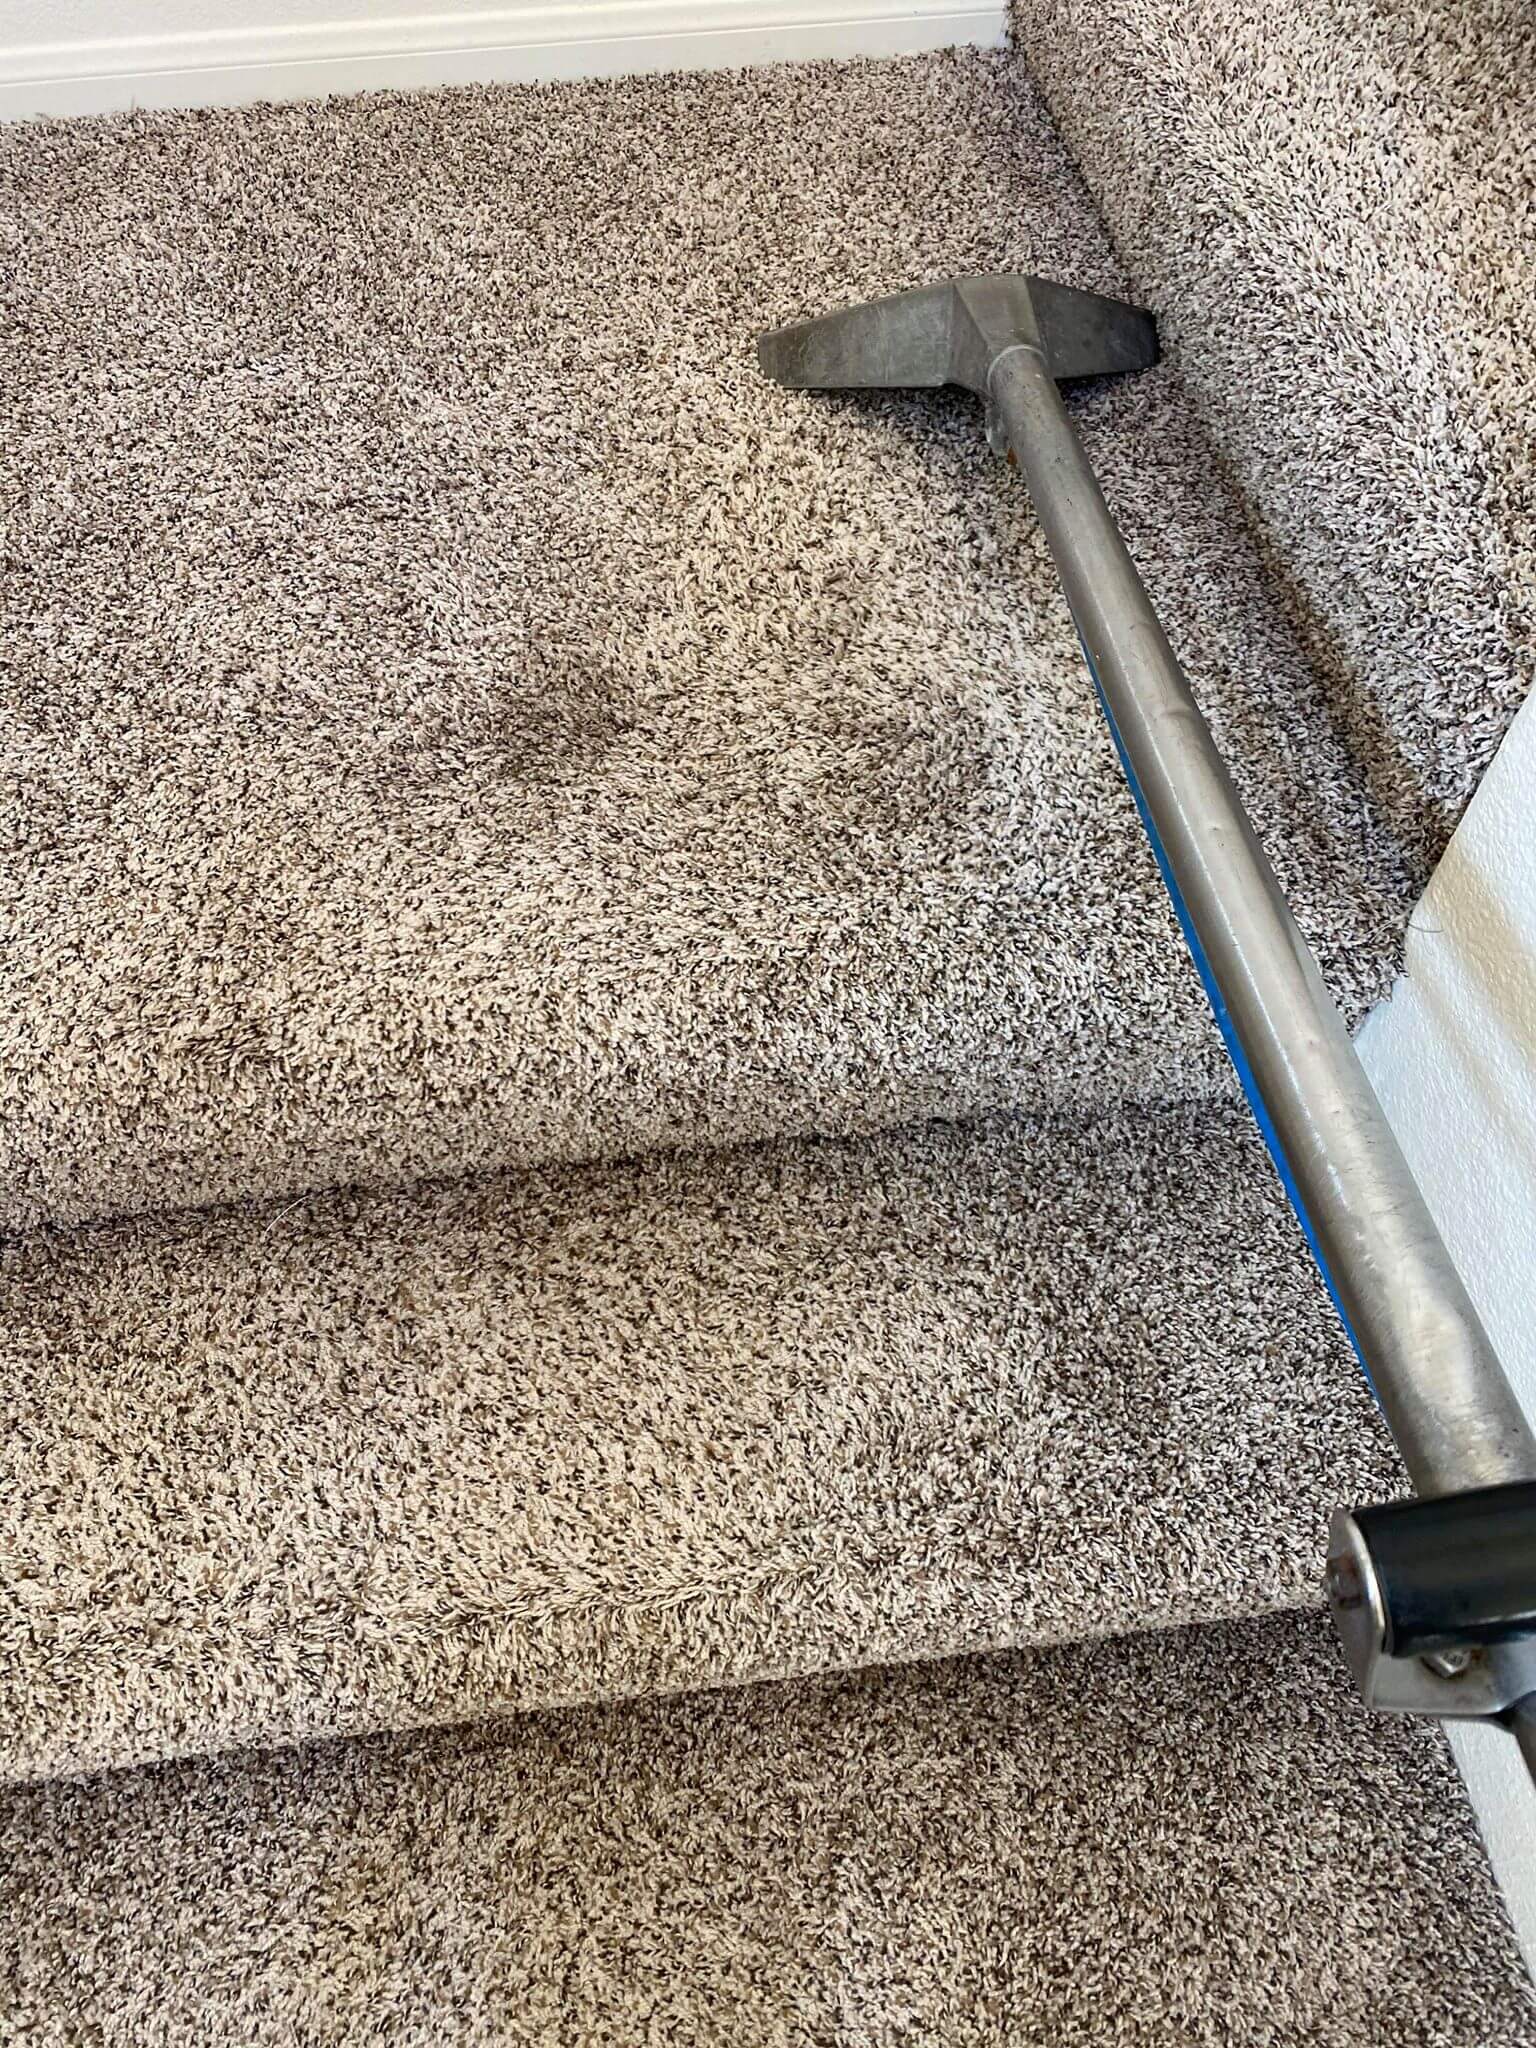 Stairs-Carpet-Cleaning